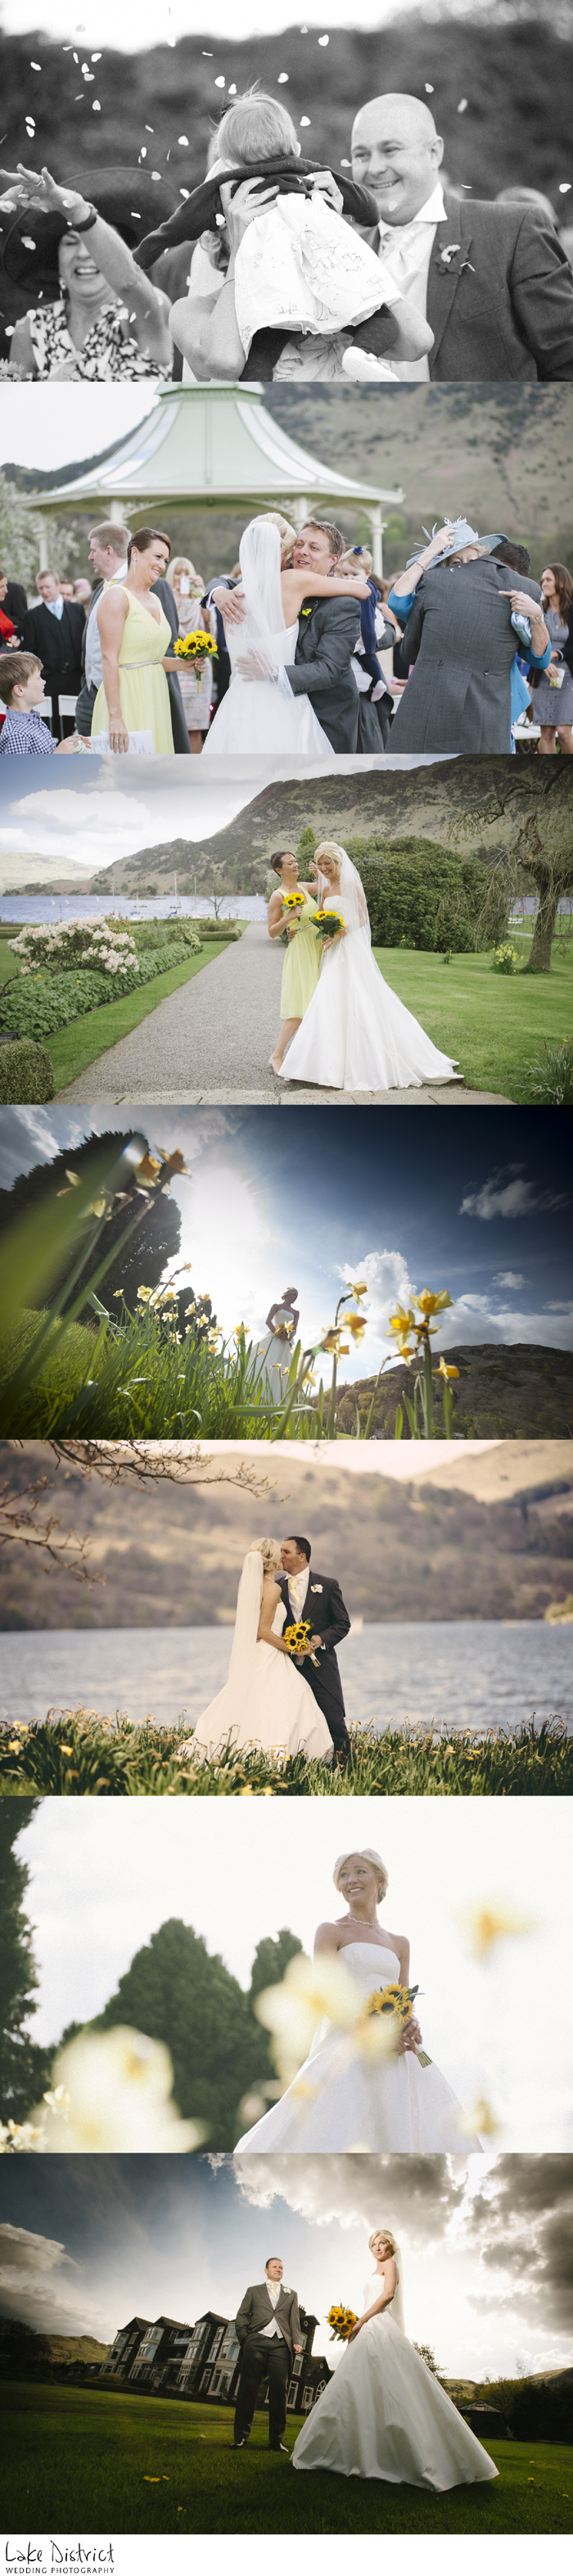 weddings photographed by the lake districts wedding photographer